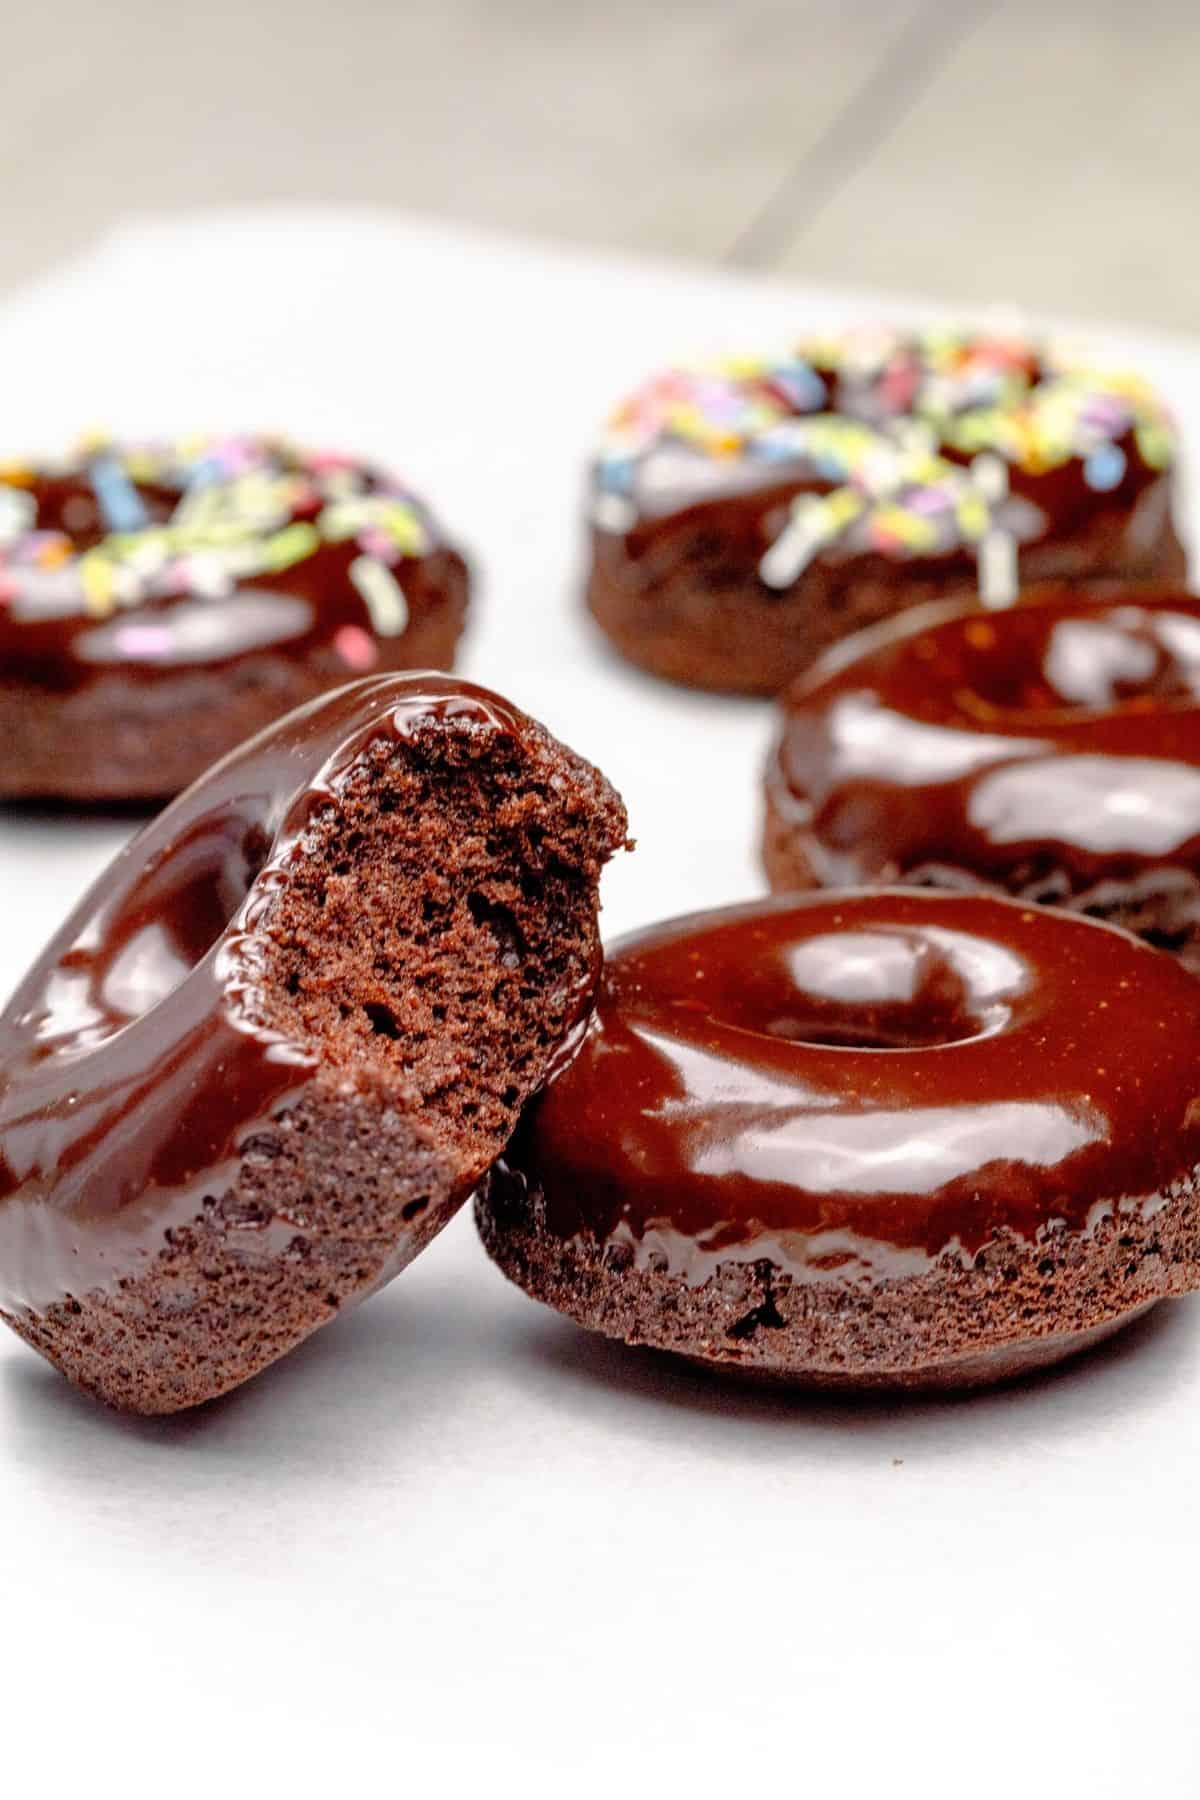 2 gluten free vegan chocolate donuts are next to each other on a white parchment paper. One of the donuts is leaned against the other with a bite taken out of it. Donuts covered in sprinkles are blurred in the background.